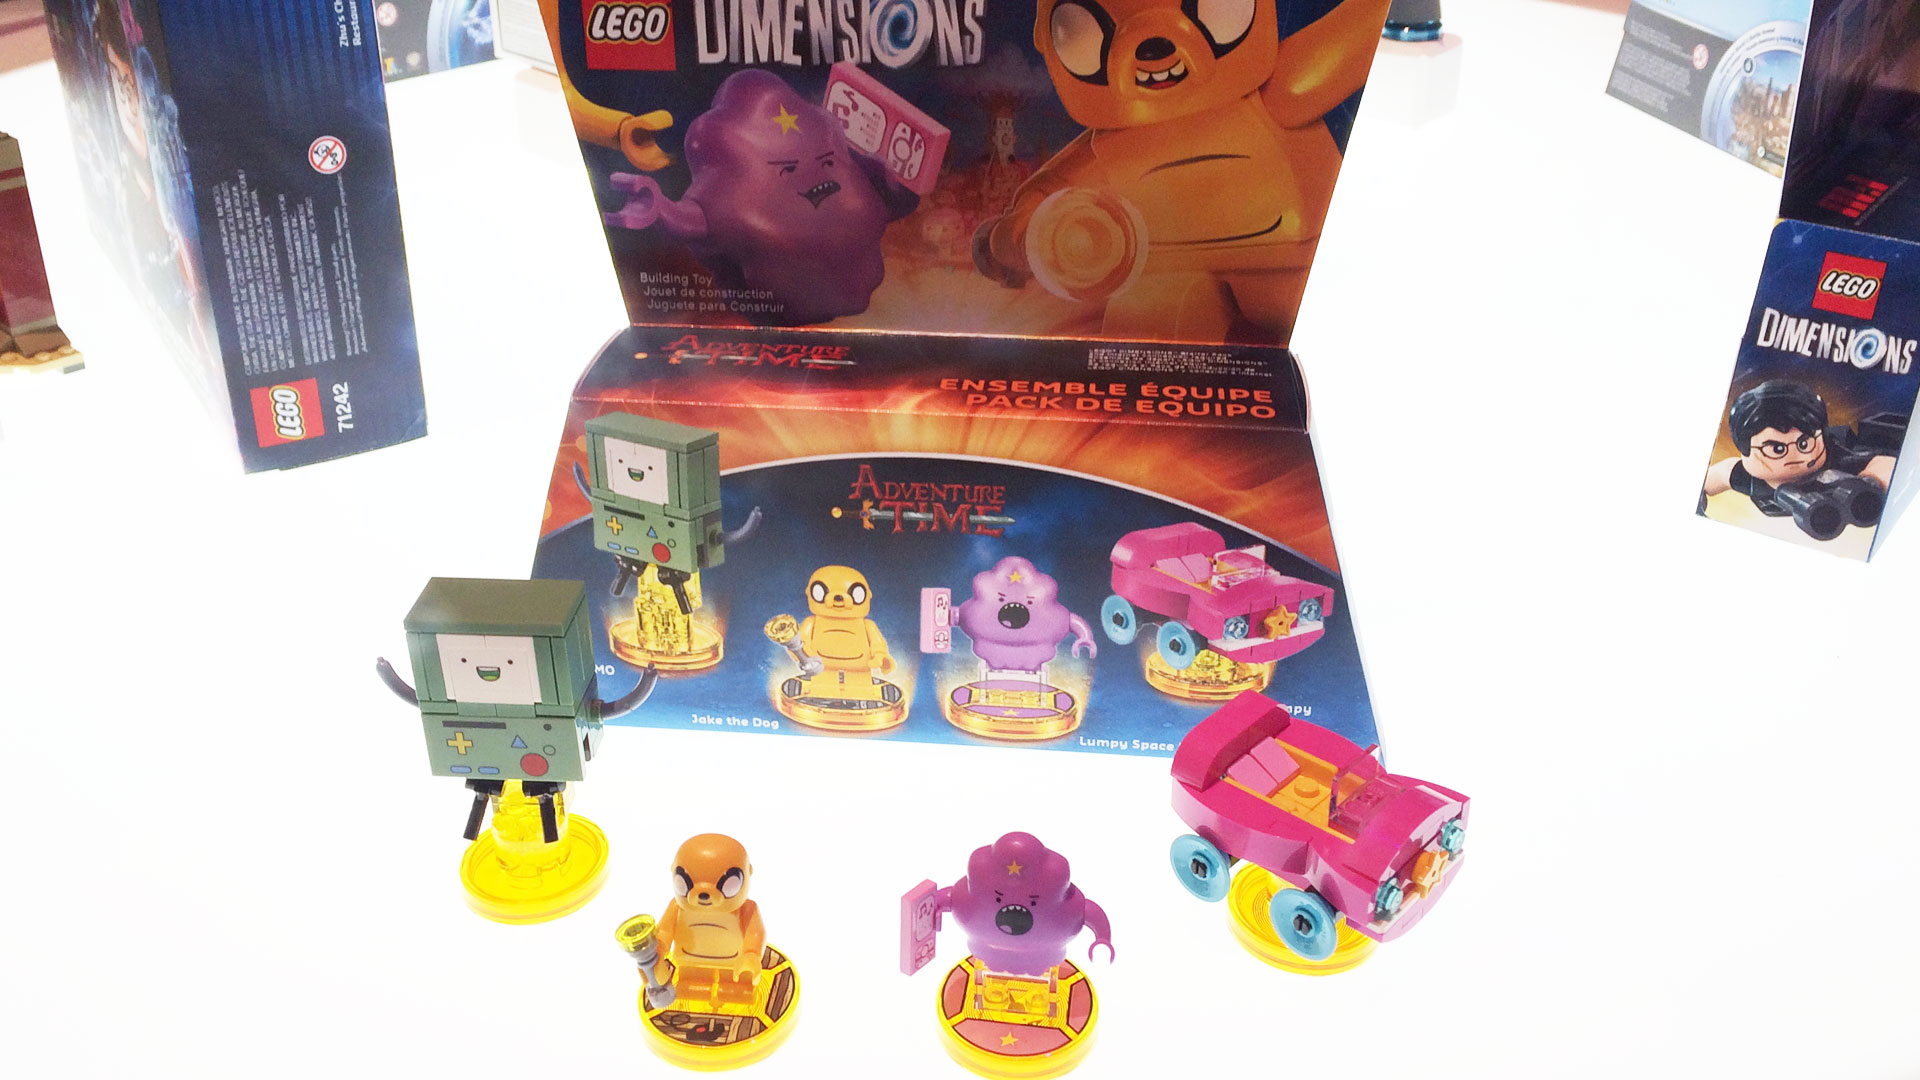 LEGO Dimensions Adventure Time Team Pack